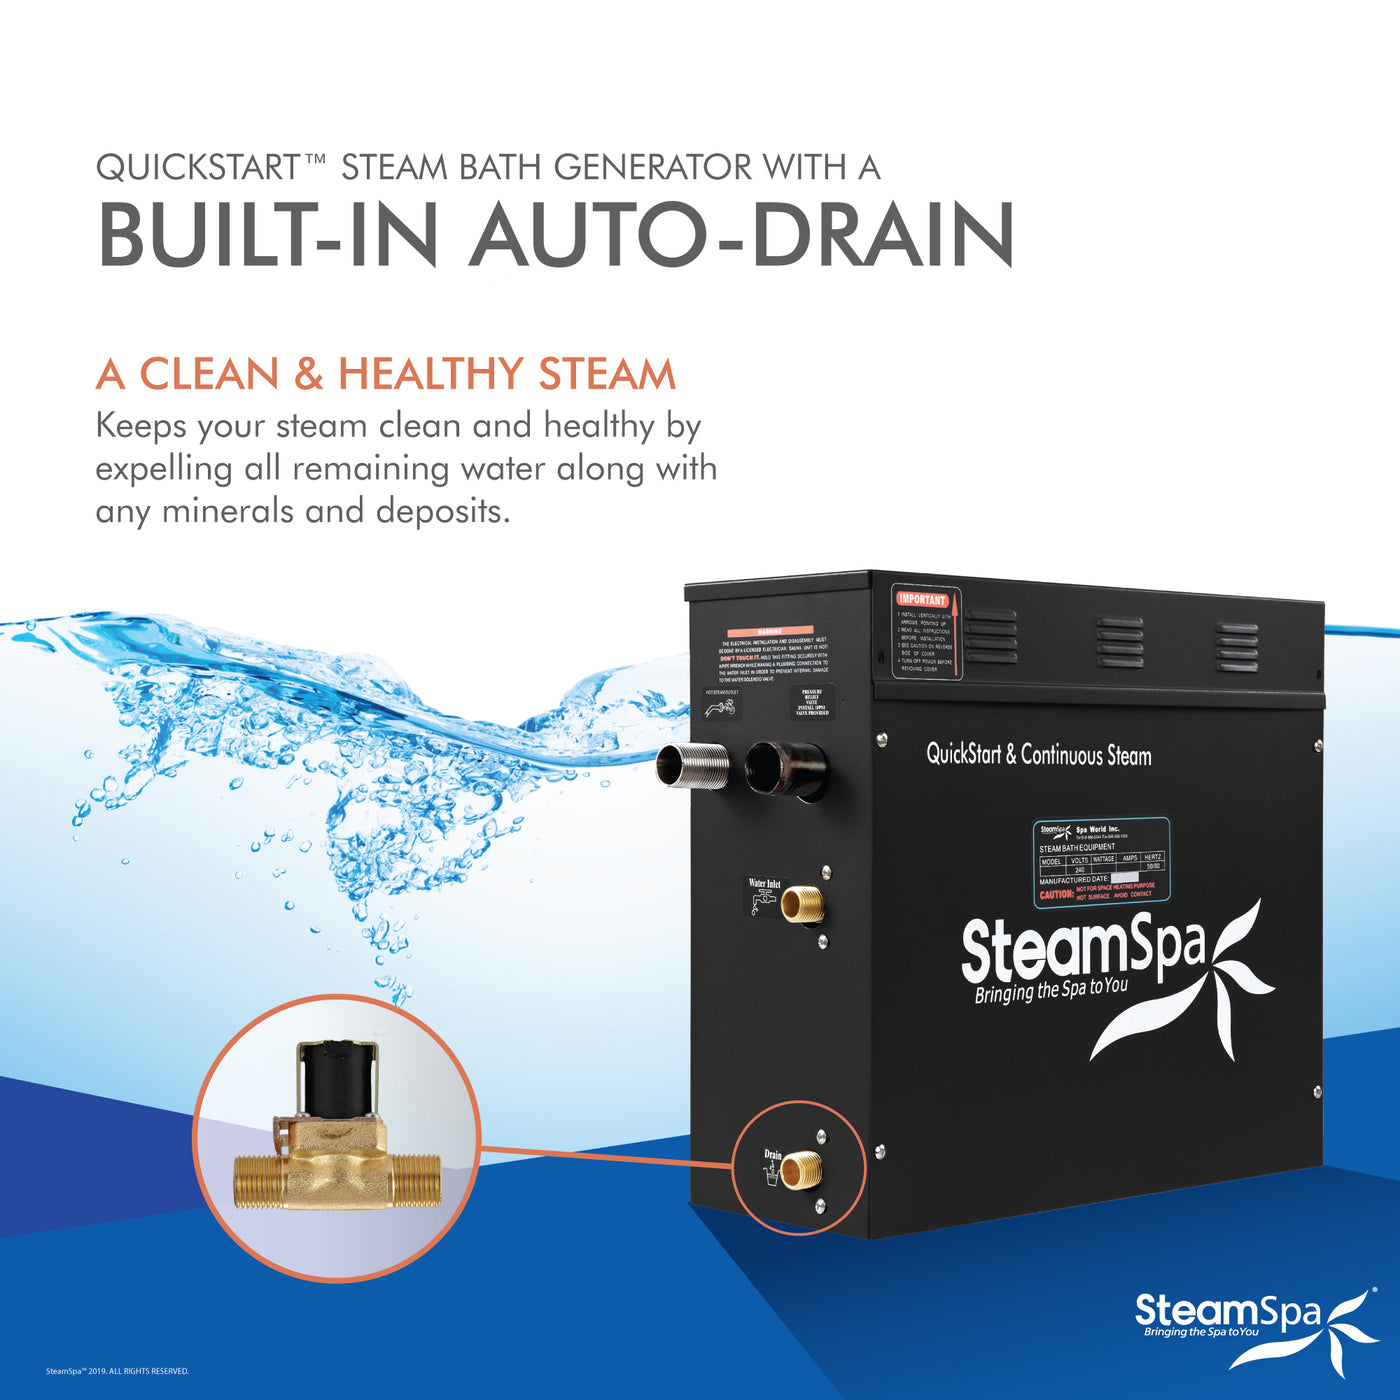 Black Series WiFi and Bluetooth 7.5kW QuickStart Steam Bath Generator Package with Dual Aroma Pump in Gold BKT750GD-ADP